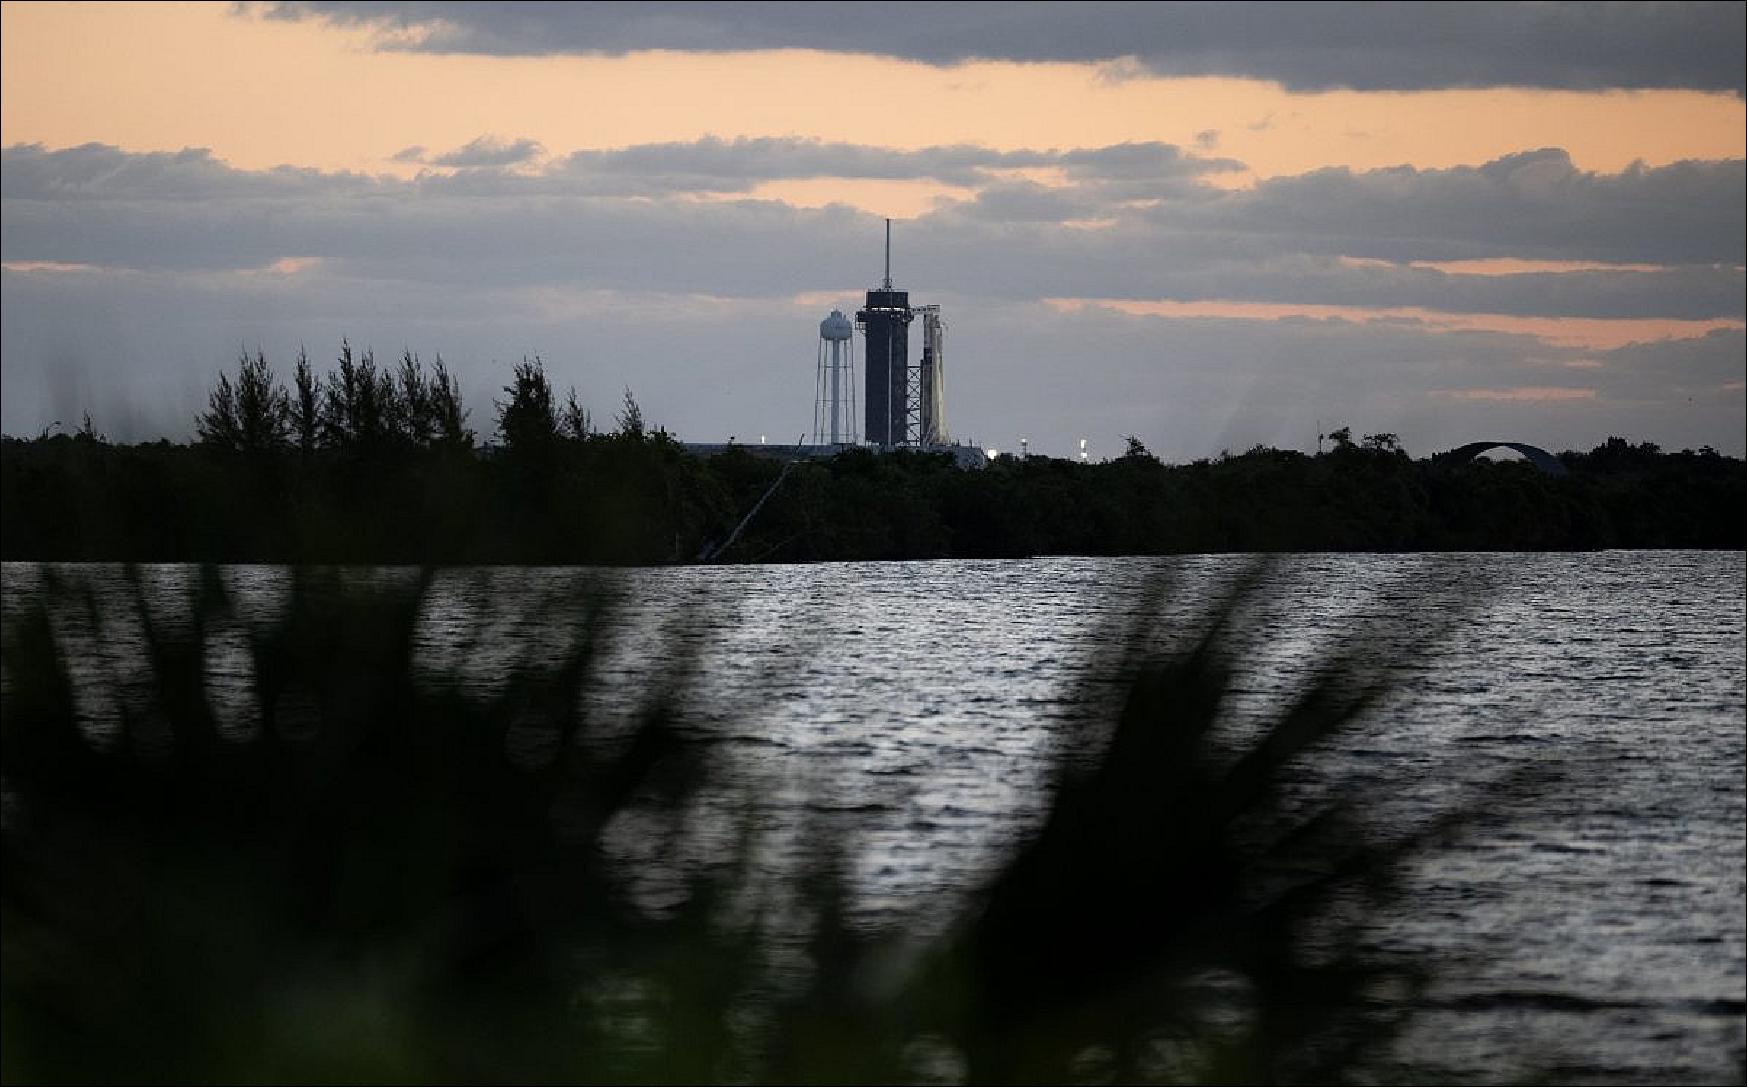 Figure 3: A SpaceX Falcon 9 rocket with the company’s Crew Dragon spacecraft onboard is seen at sunrise on the launch pad at Launch Complex 39A as preparations continue for the Crew-4 mission, Wednesday, April 20, 2022, at NASA’s Kennedy Space Center in Florida. NASA’s SpaceX Crew-4 mission is the fourth crew rotation mission of the SpaceX Crew Dragon spacecraft and Falcon 9 rocket to the International Space Station as part of the agency’s Commercial Crew Program (photo credit: NASA/Joel Kowsky)